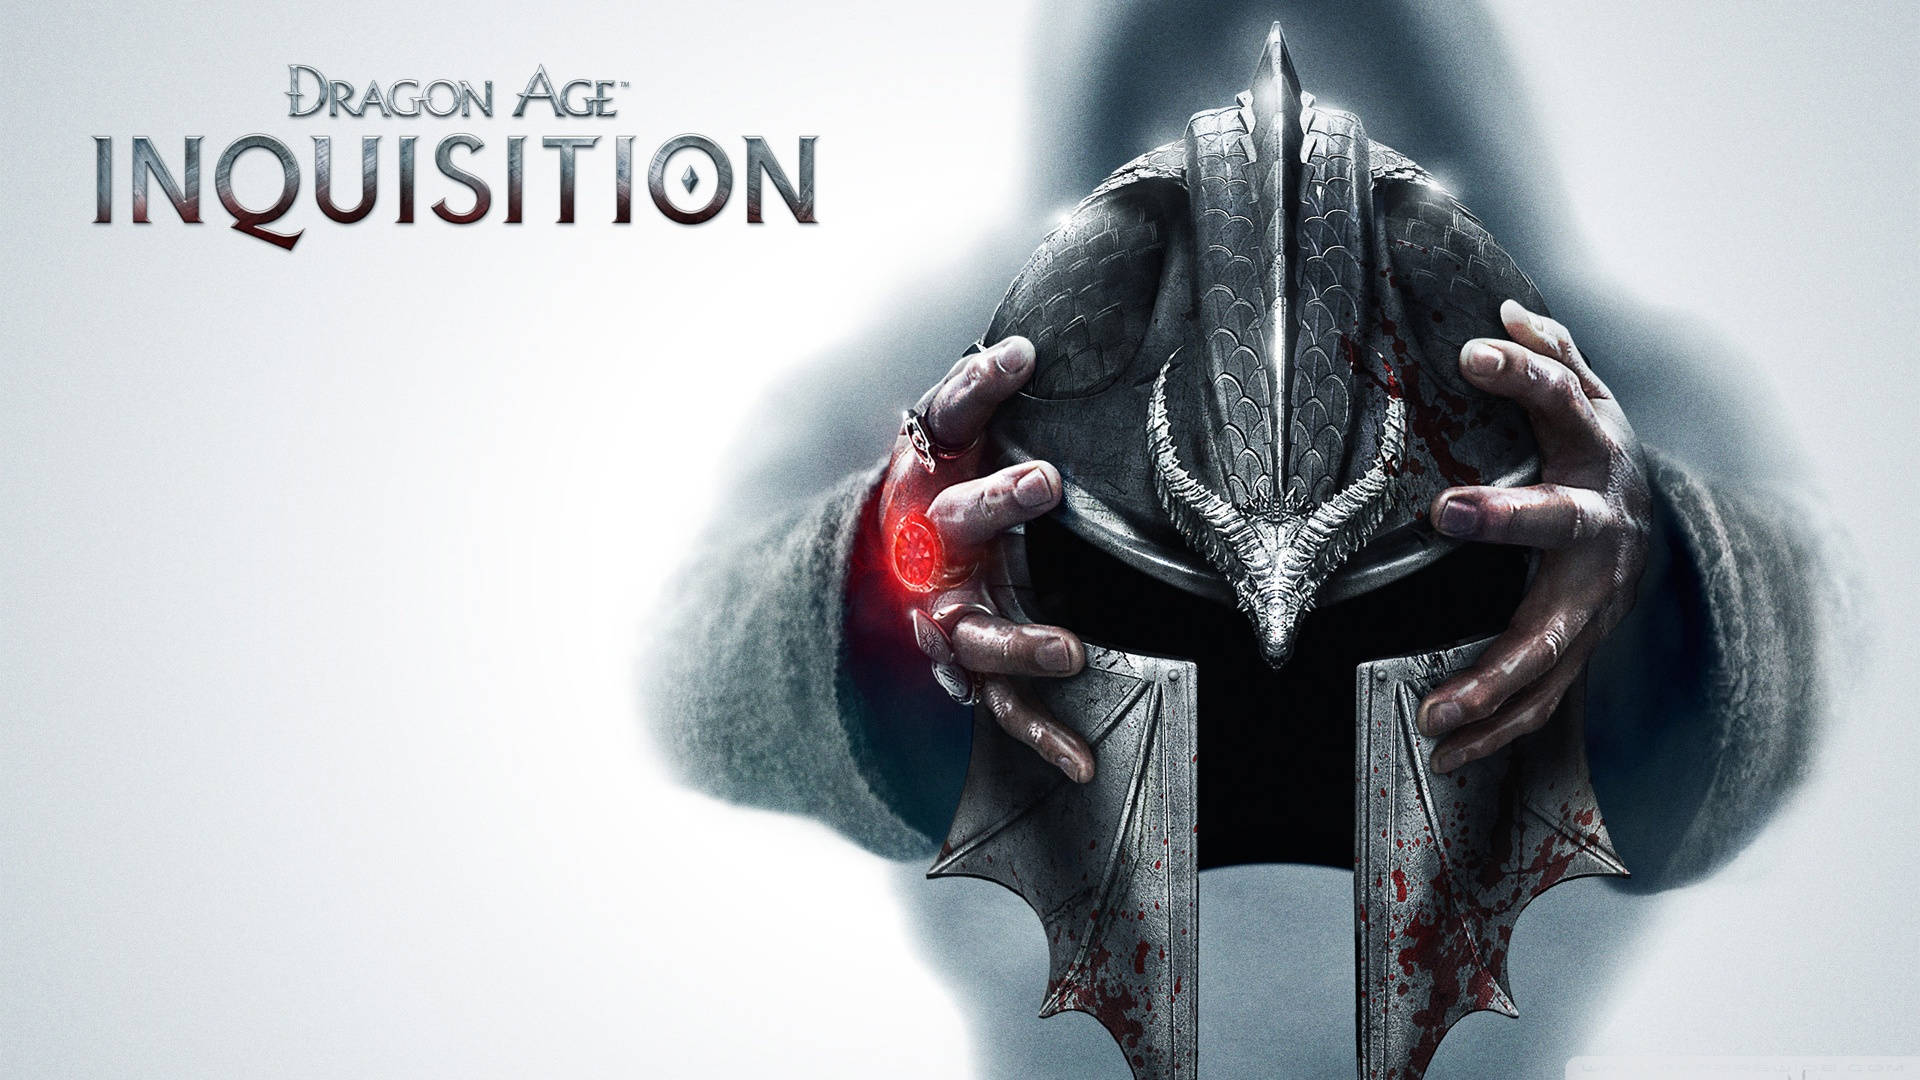 Dragon Age Inquisition Video Game Series Helmet Poster Wallpaper